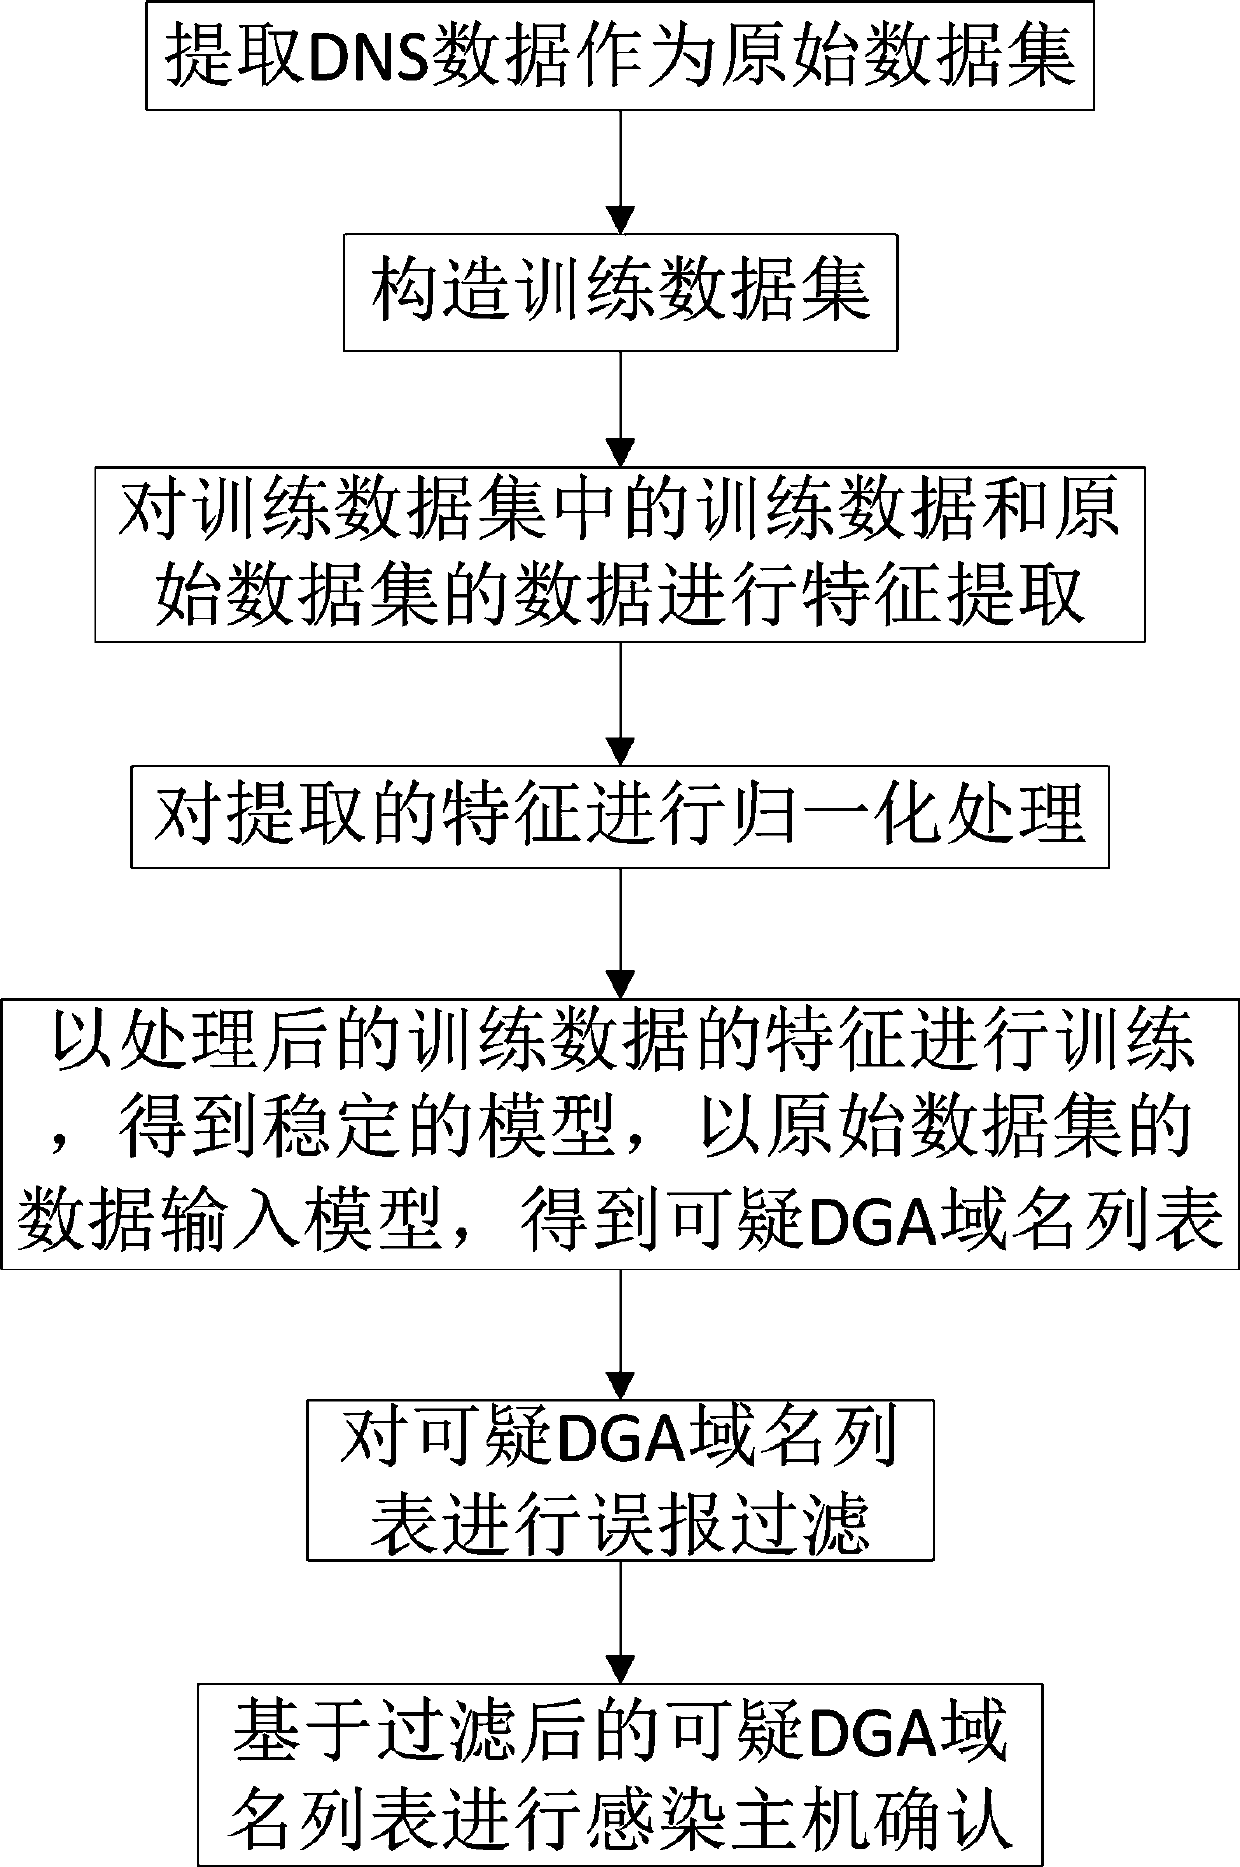 Method for detecting host infection caused by DGA malicious software